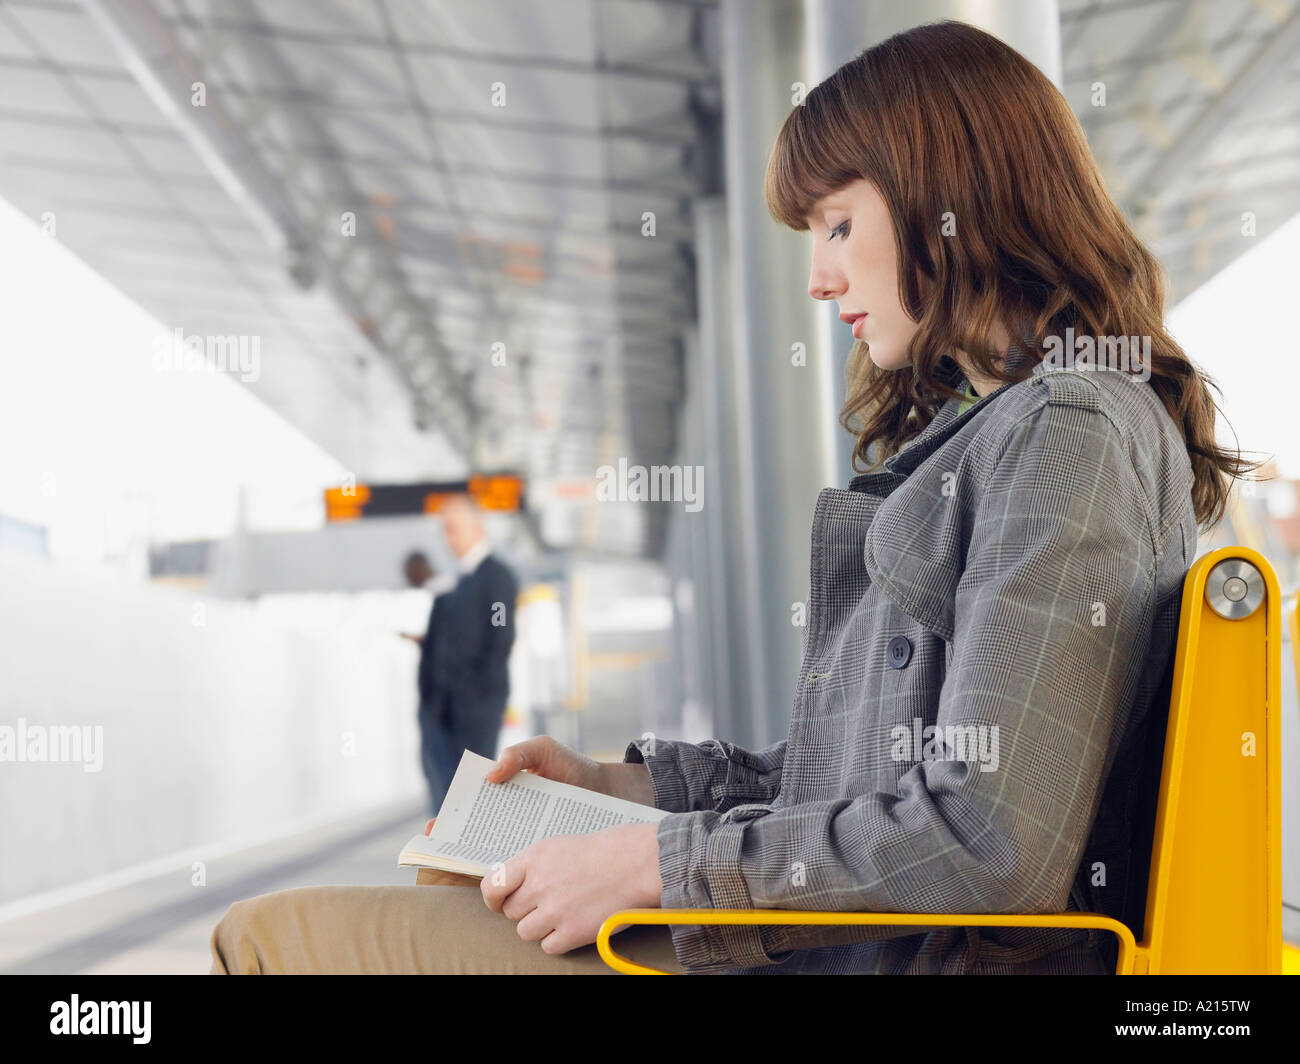 Businesswoman sitting on bench, reading a book at Train Station, side view Stock Photo